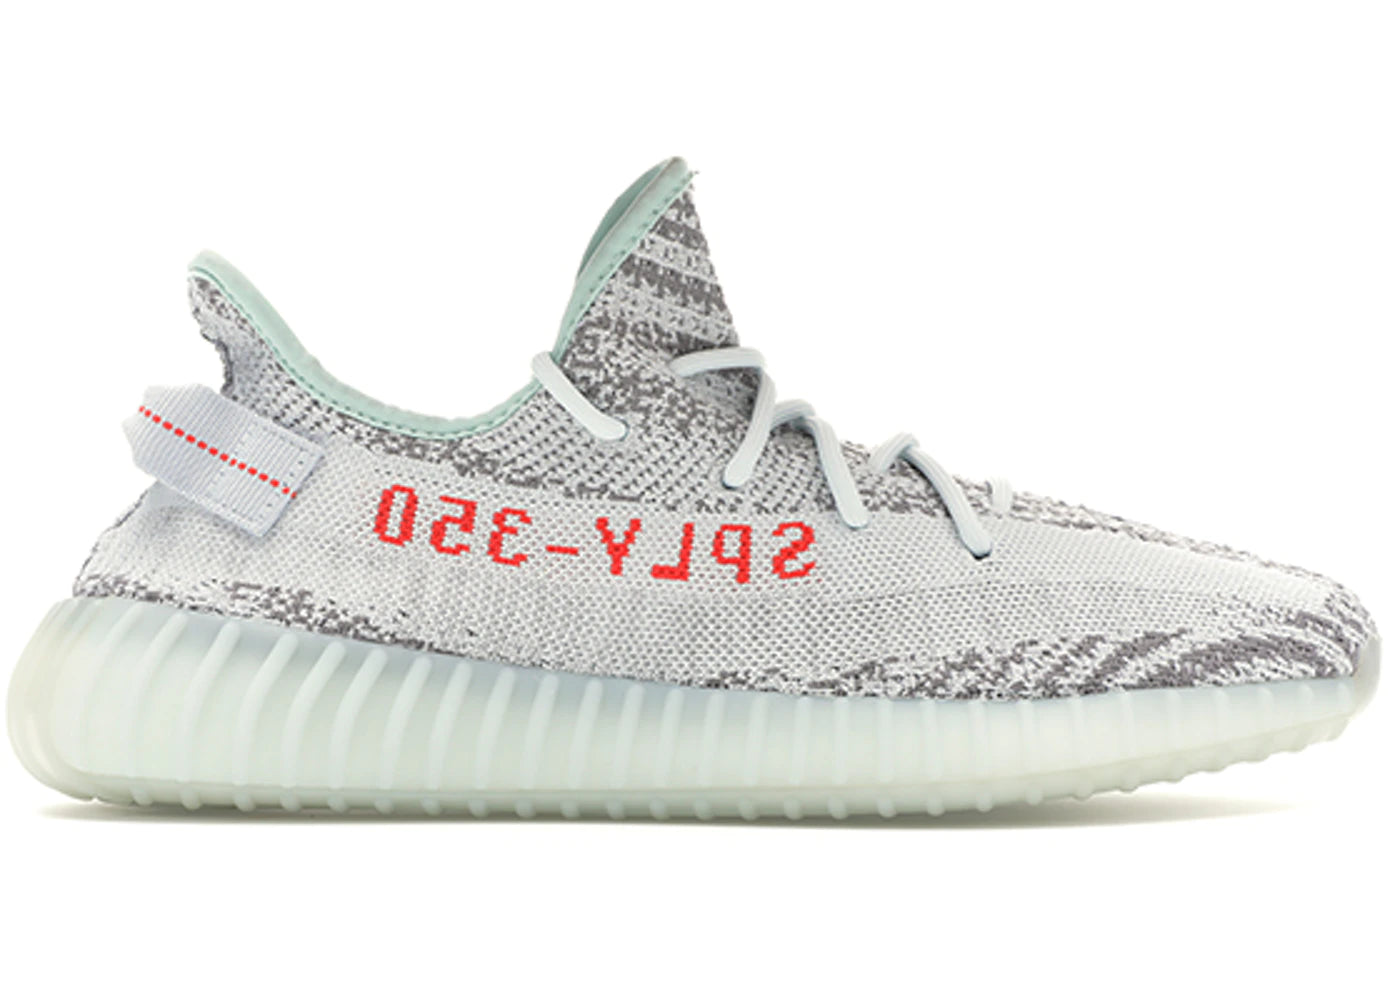 Adidas Yeezy Boost 350 V2 Blue Tint - Used